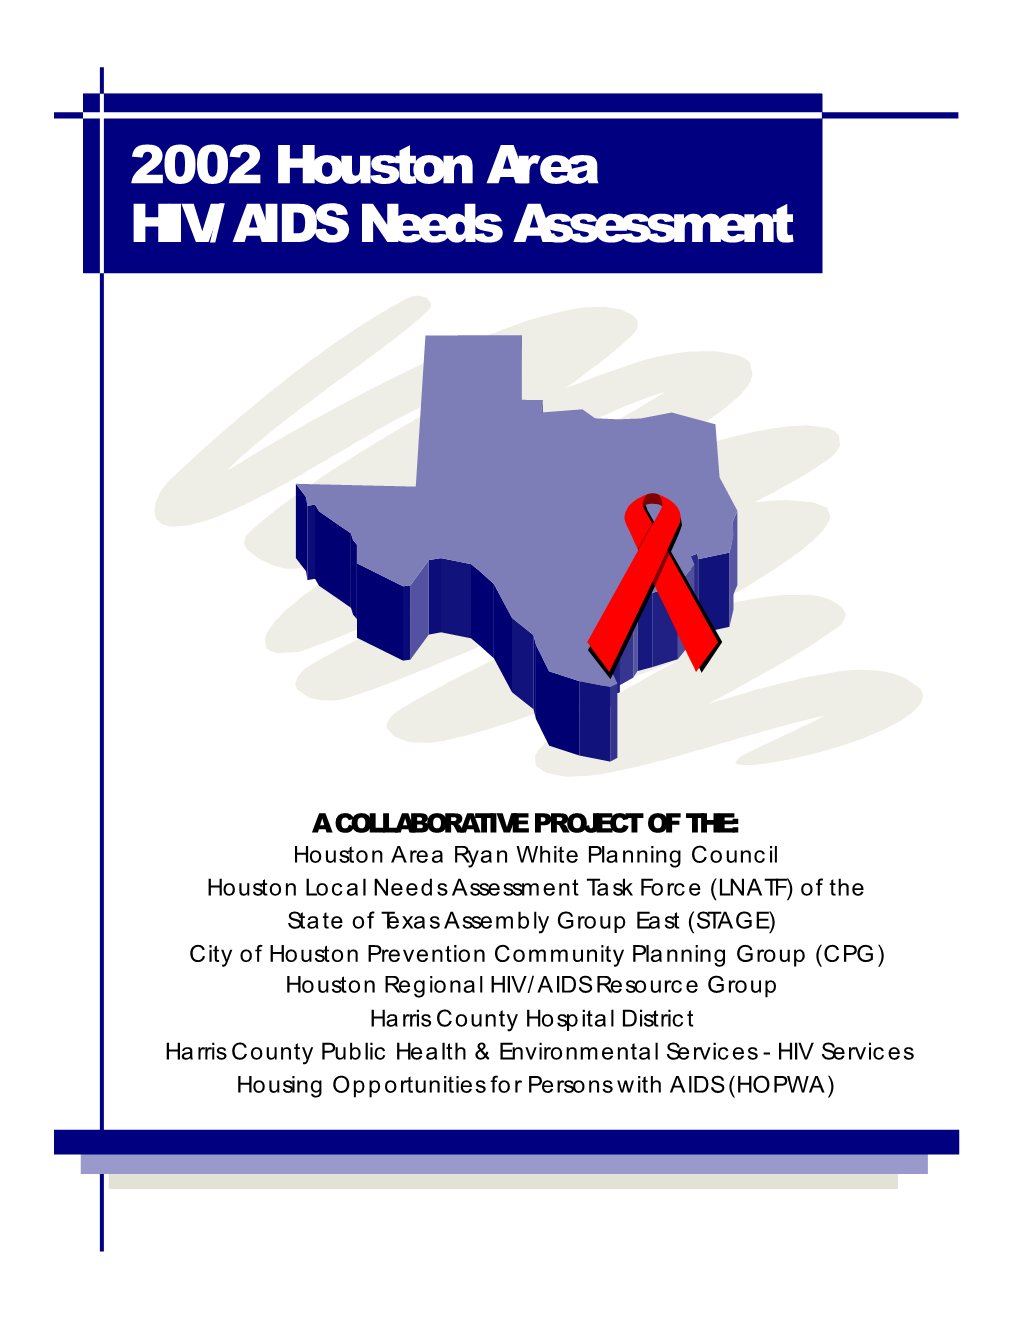 Houston Local Needs Assessment Task Force (LNATF) of The